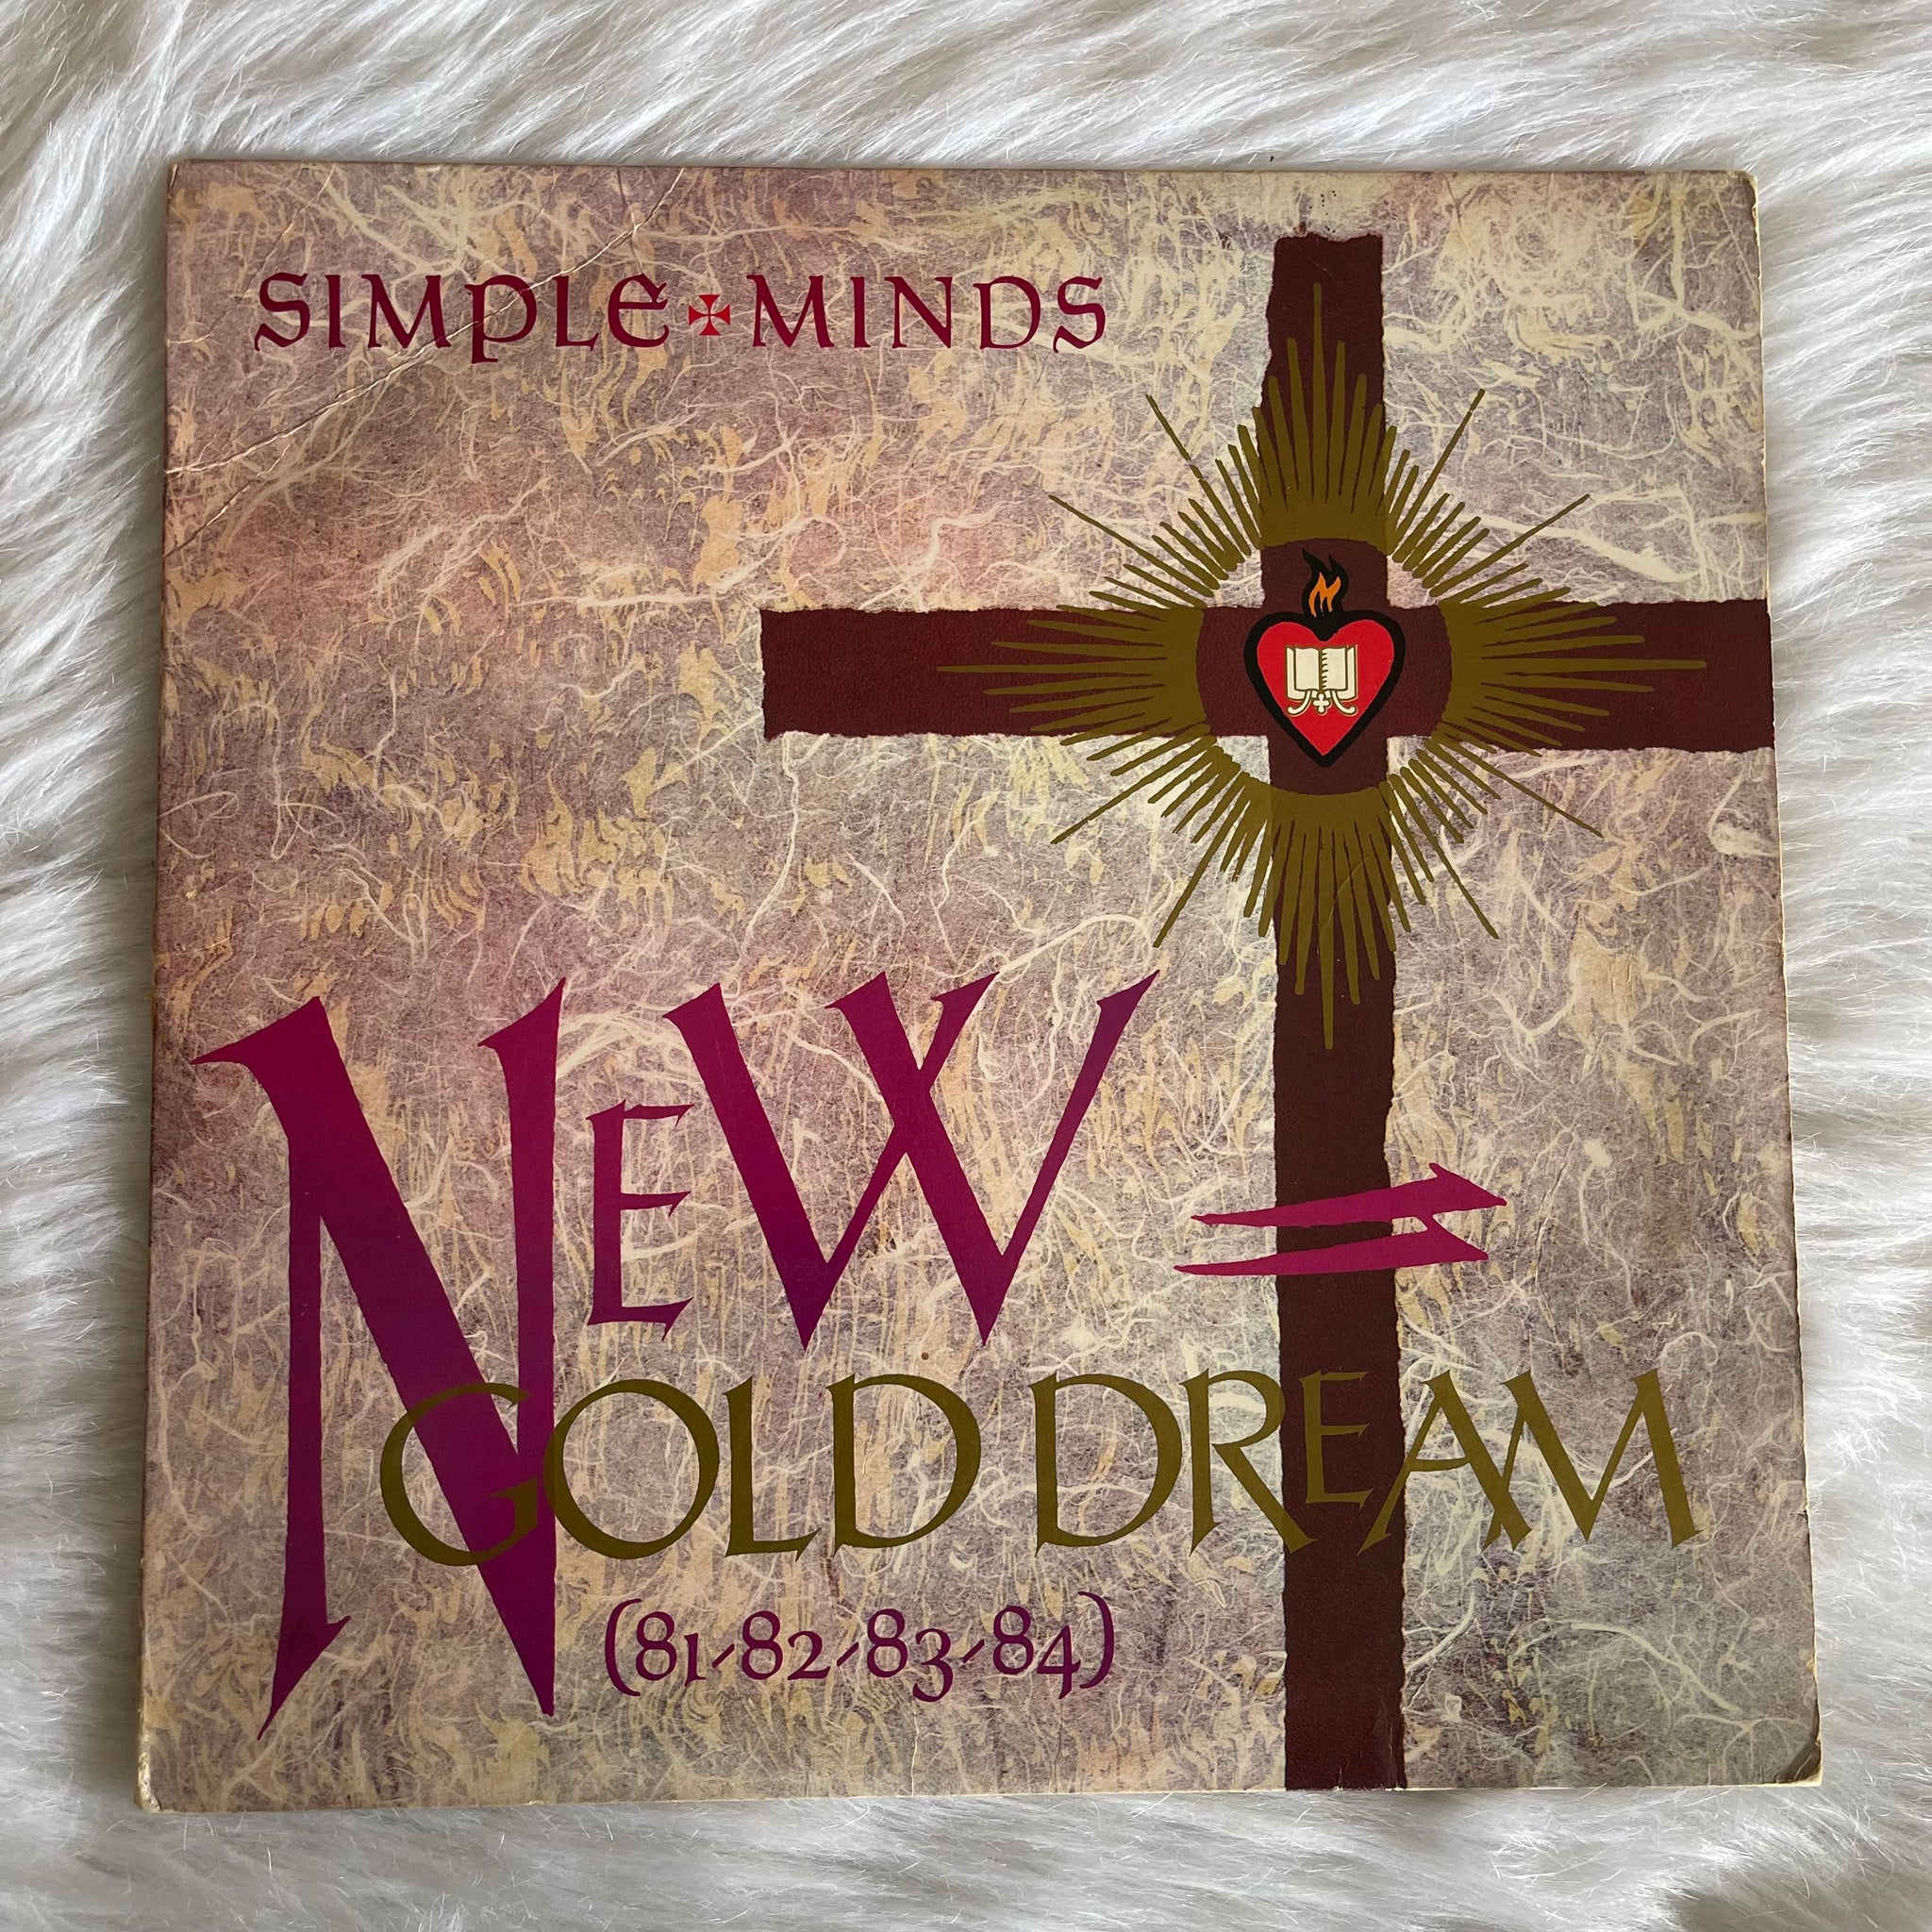 Simple Minds-New Gold Dream (81.82.83.84)